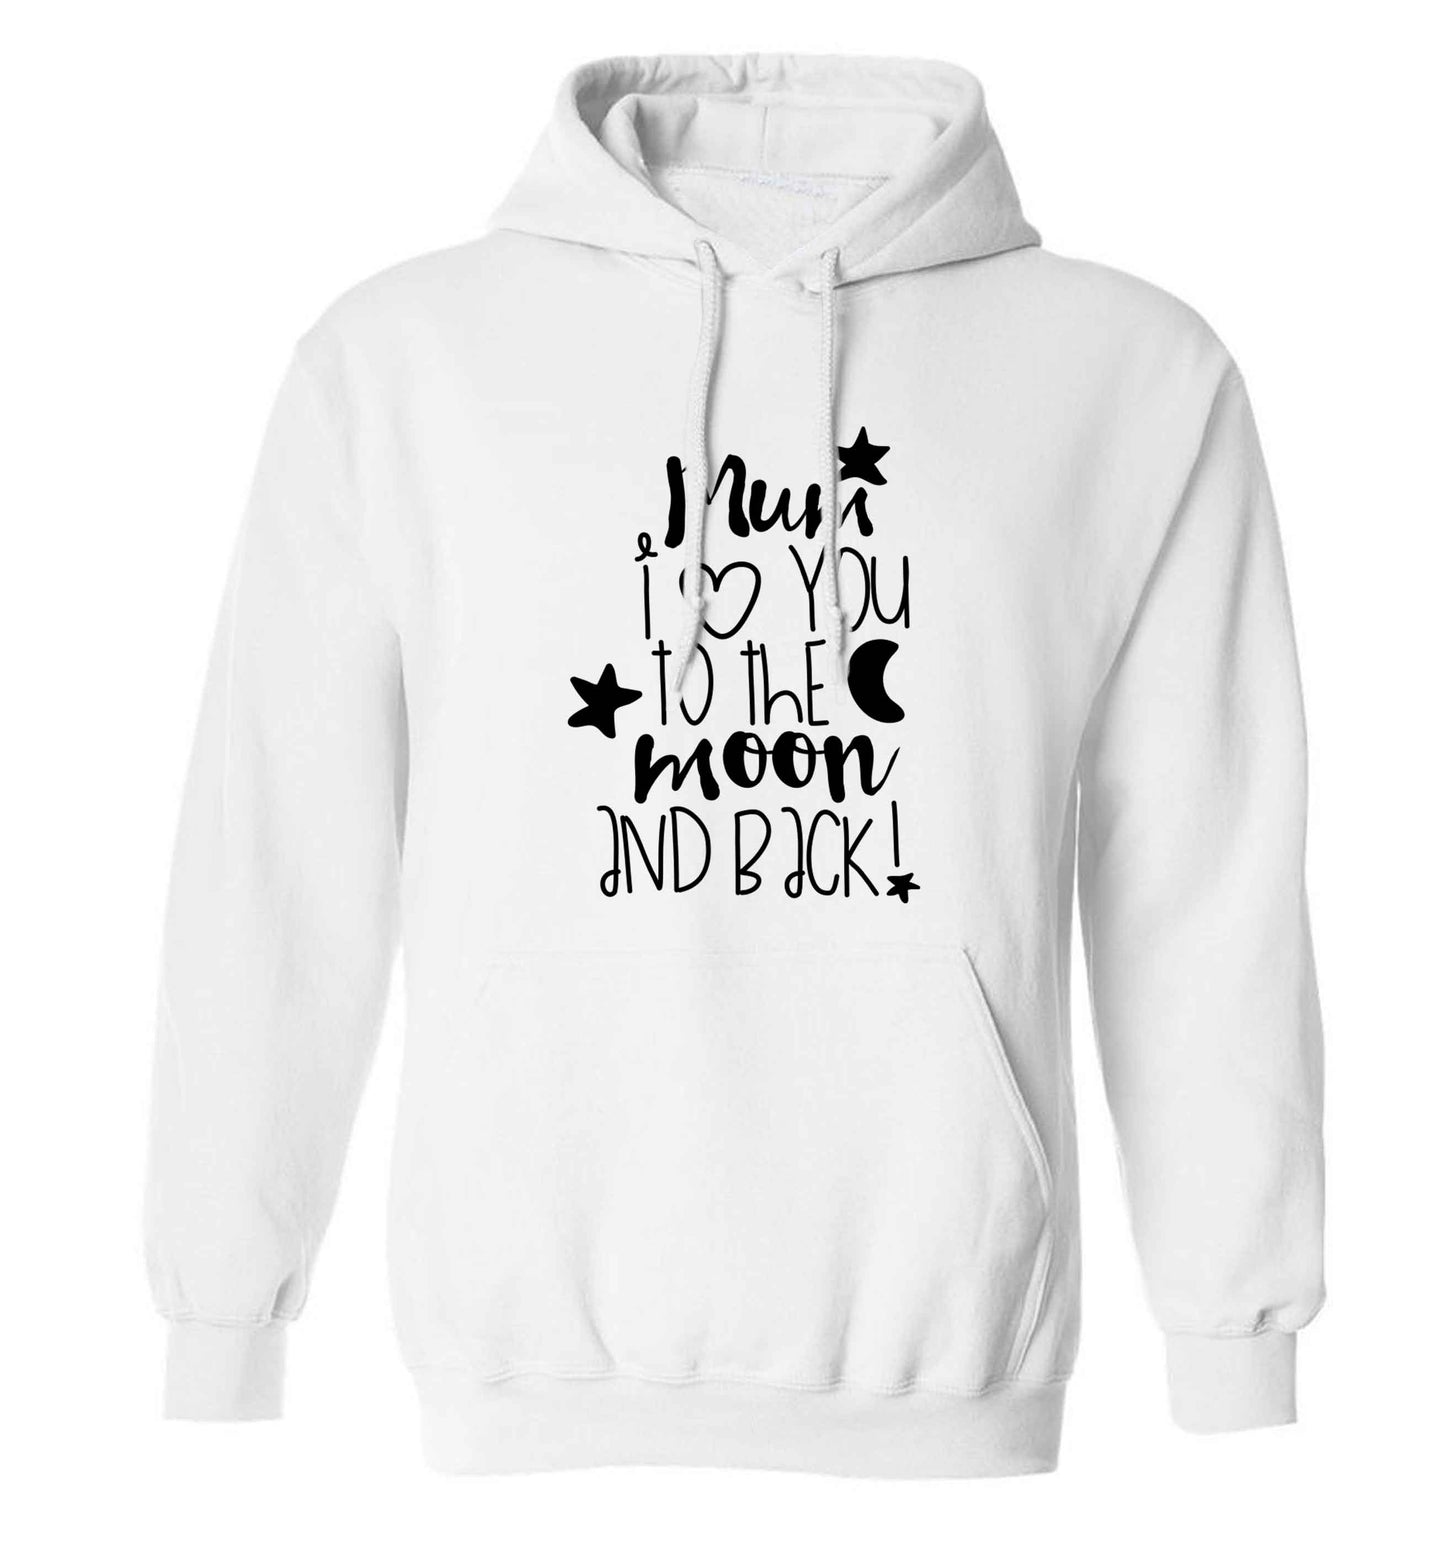 Mum I love you to the moon and back adults unisex white hoodie 2XL